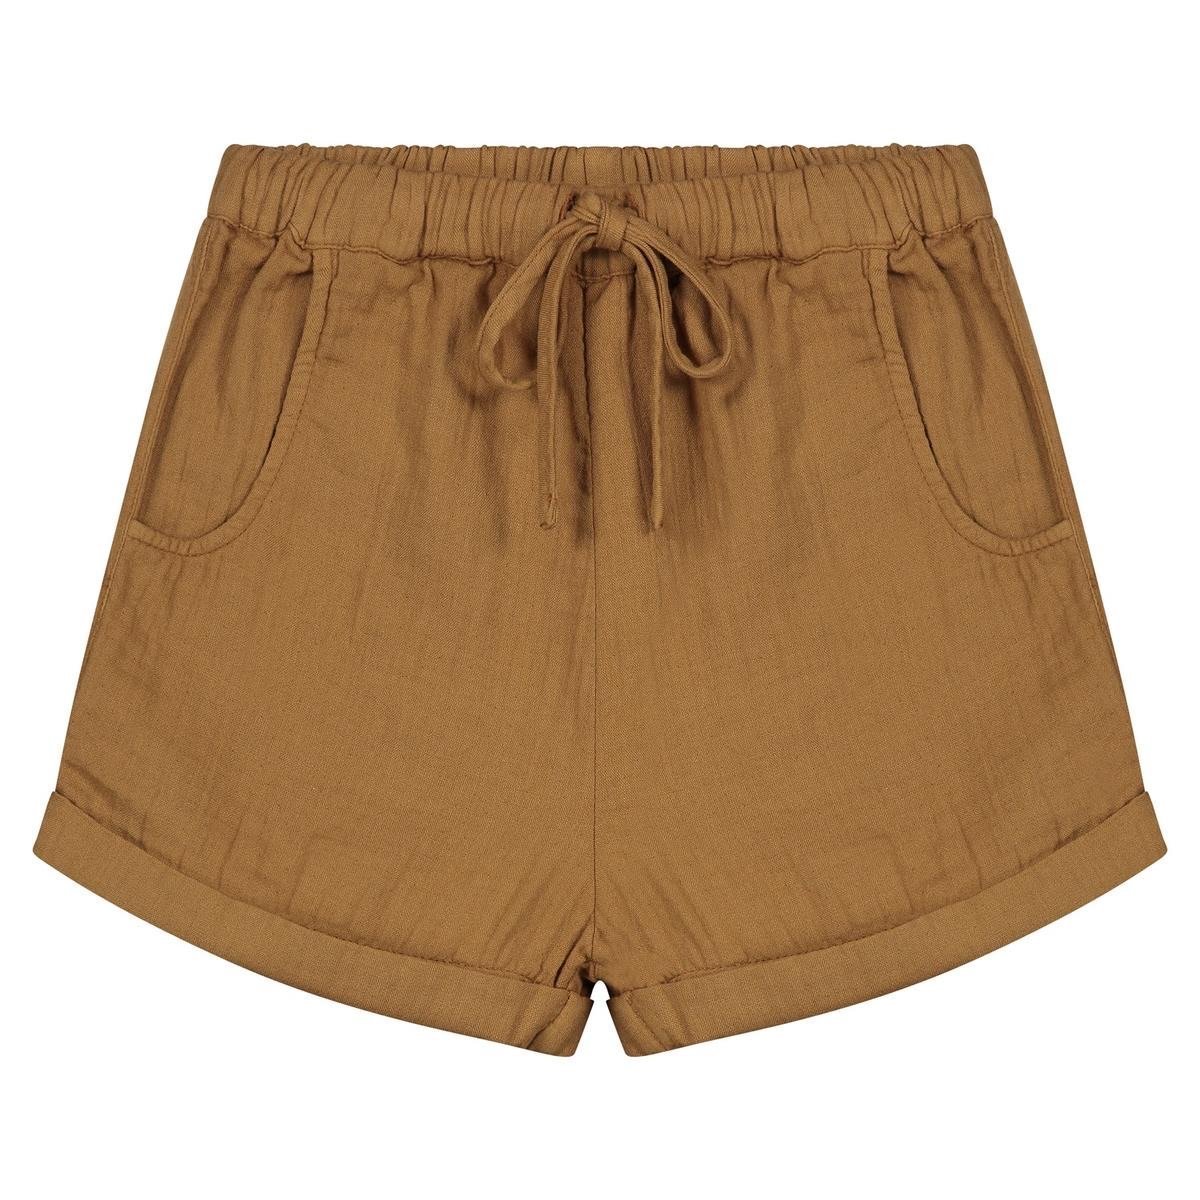 Louis Shorts find Stylish Fashion for Little People- at Little Foxx Concept Store